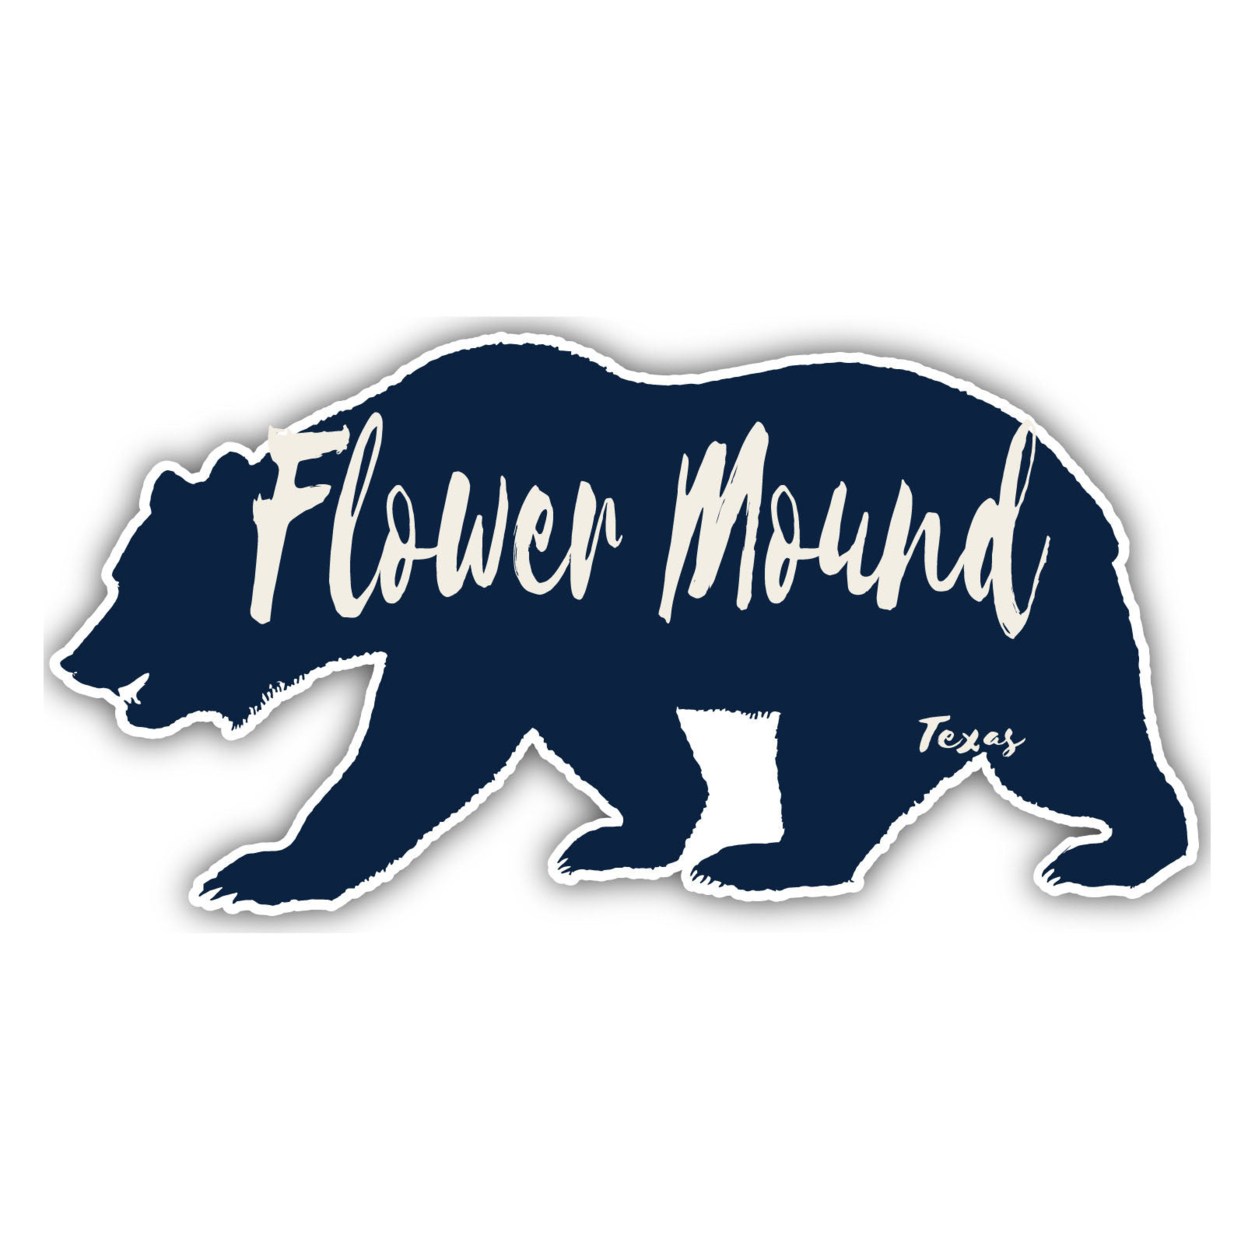 Flower Mound Texas Souvenir Decorative Stickers (Choose Theme And Size) - 4-Pack, 6-Inch, Tent